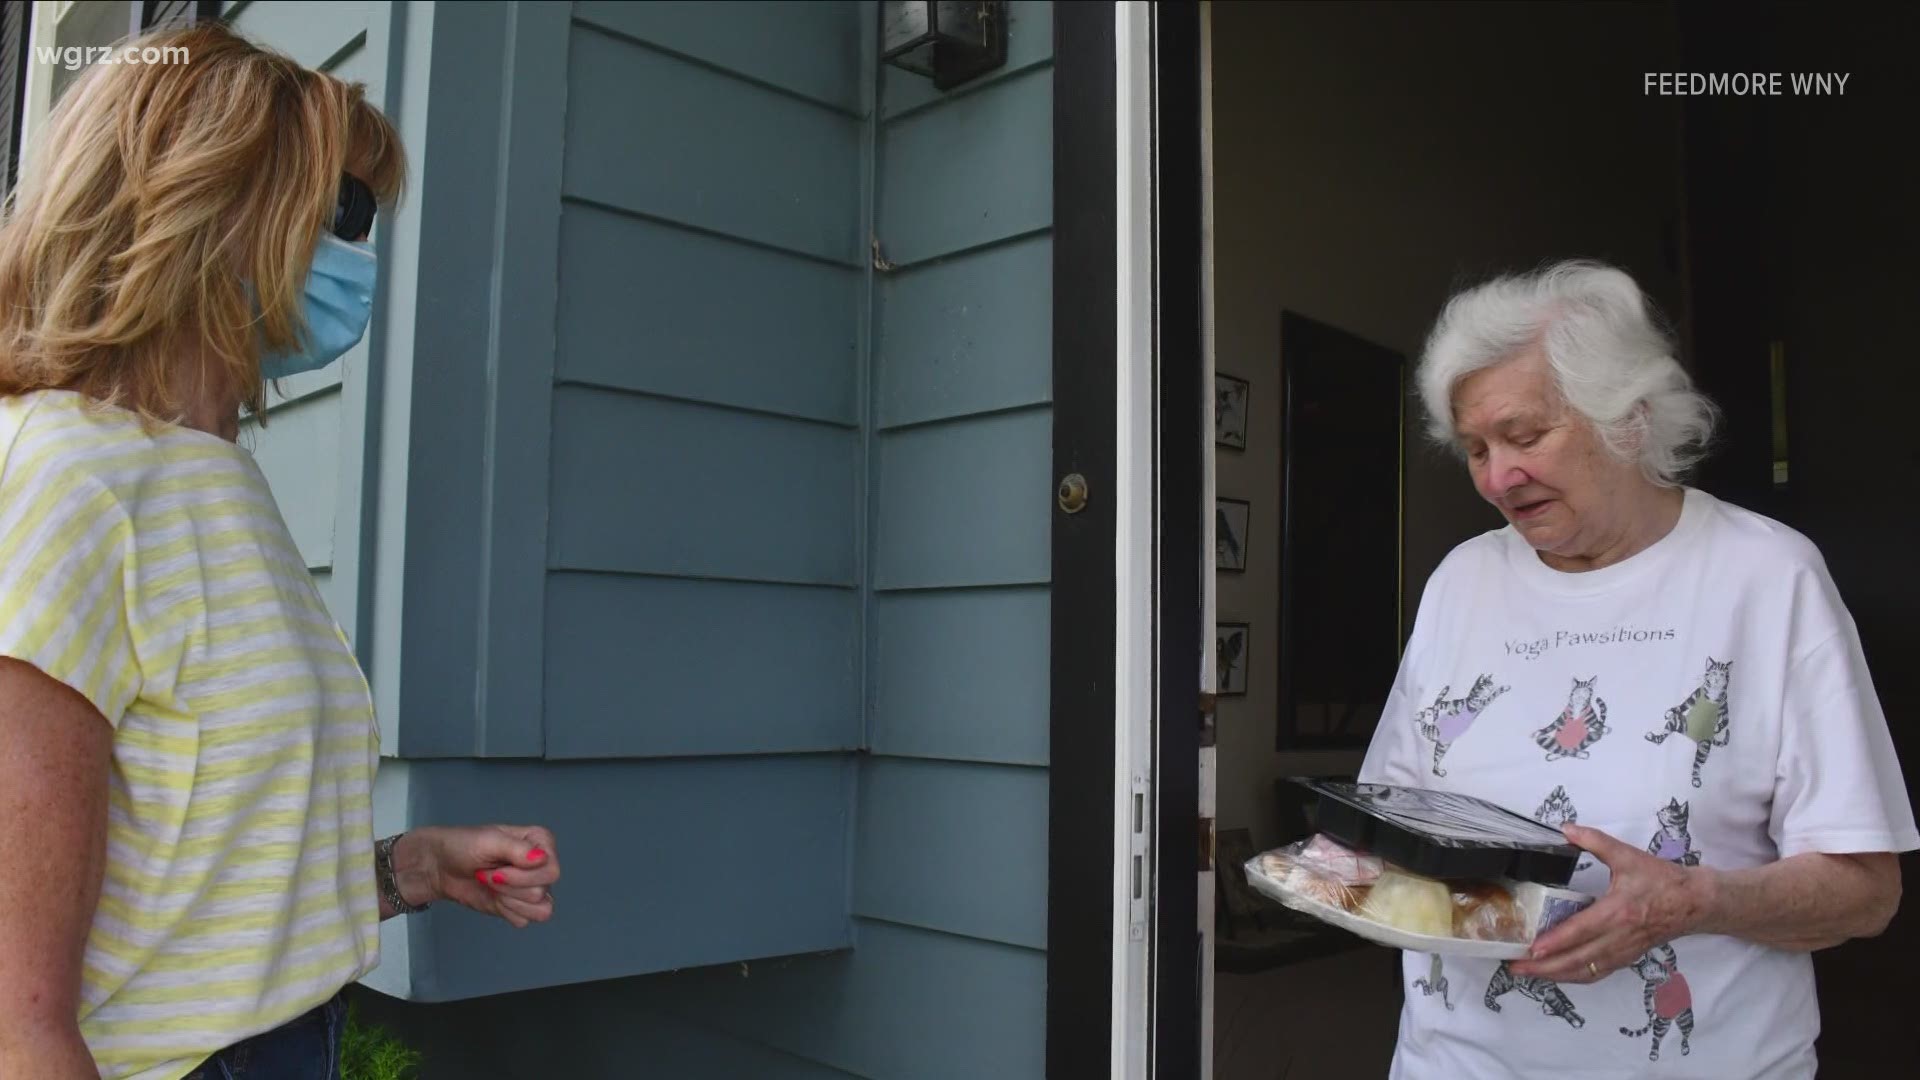 Throughout 2020, Meals on Wheels delivered 1.3 million meals to 5,500 homebound individuals in Erie and Niagara Counties.